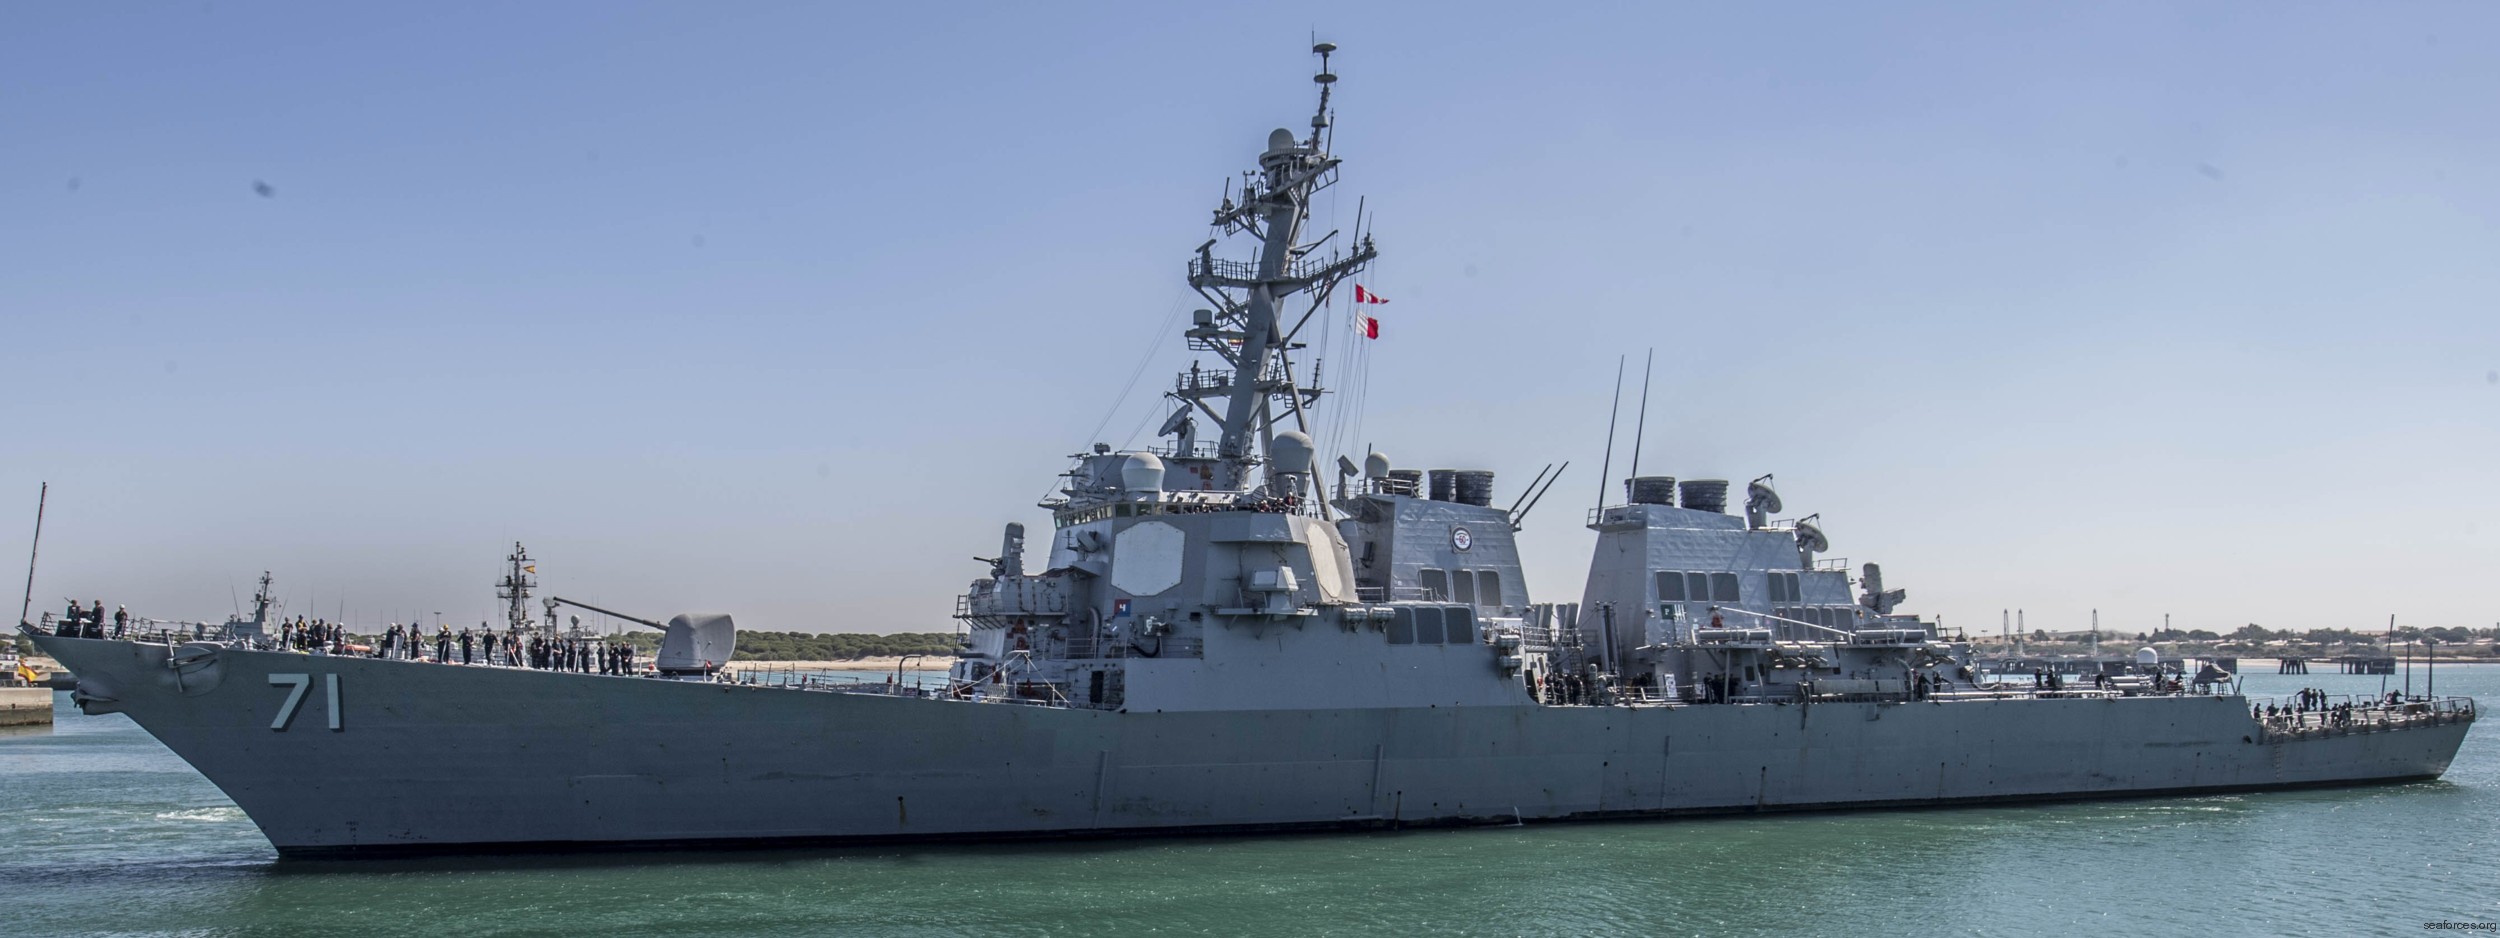 ddg-71 uss ross guided missile destroyer arleigh burke class aegis bmd 07 naval station rota spain